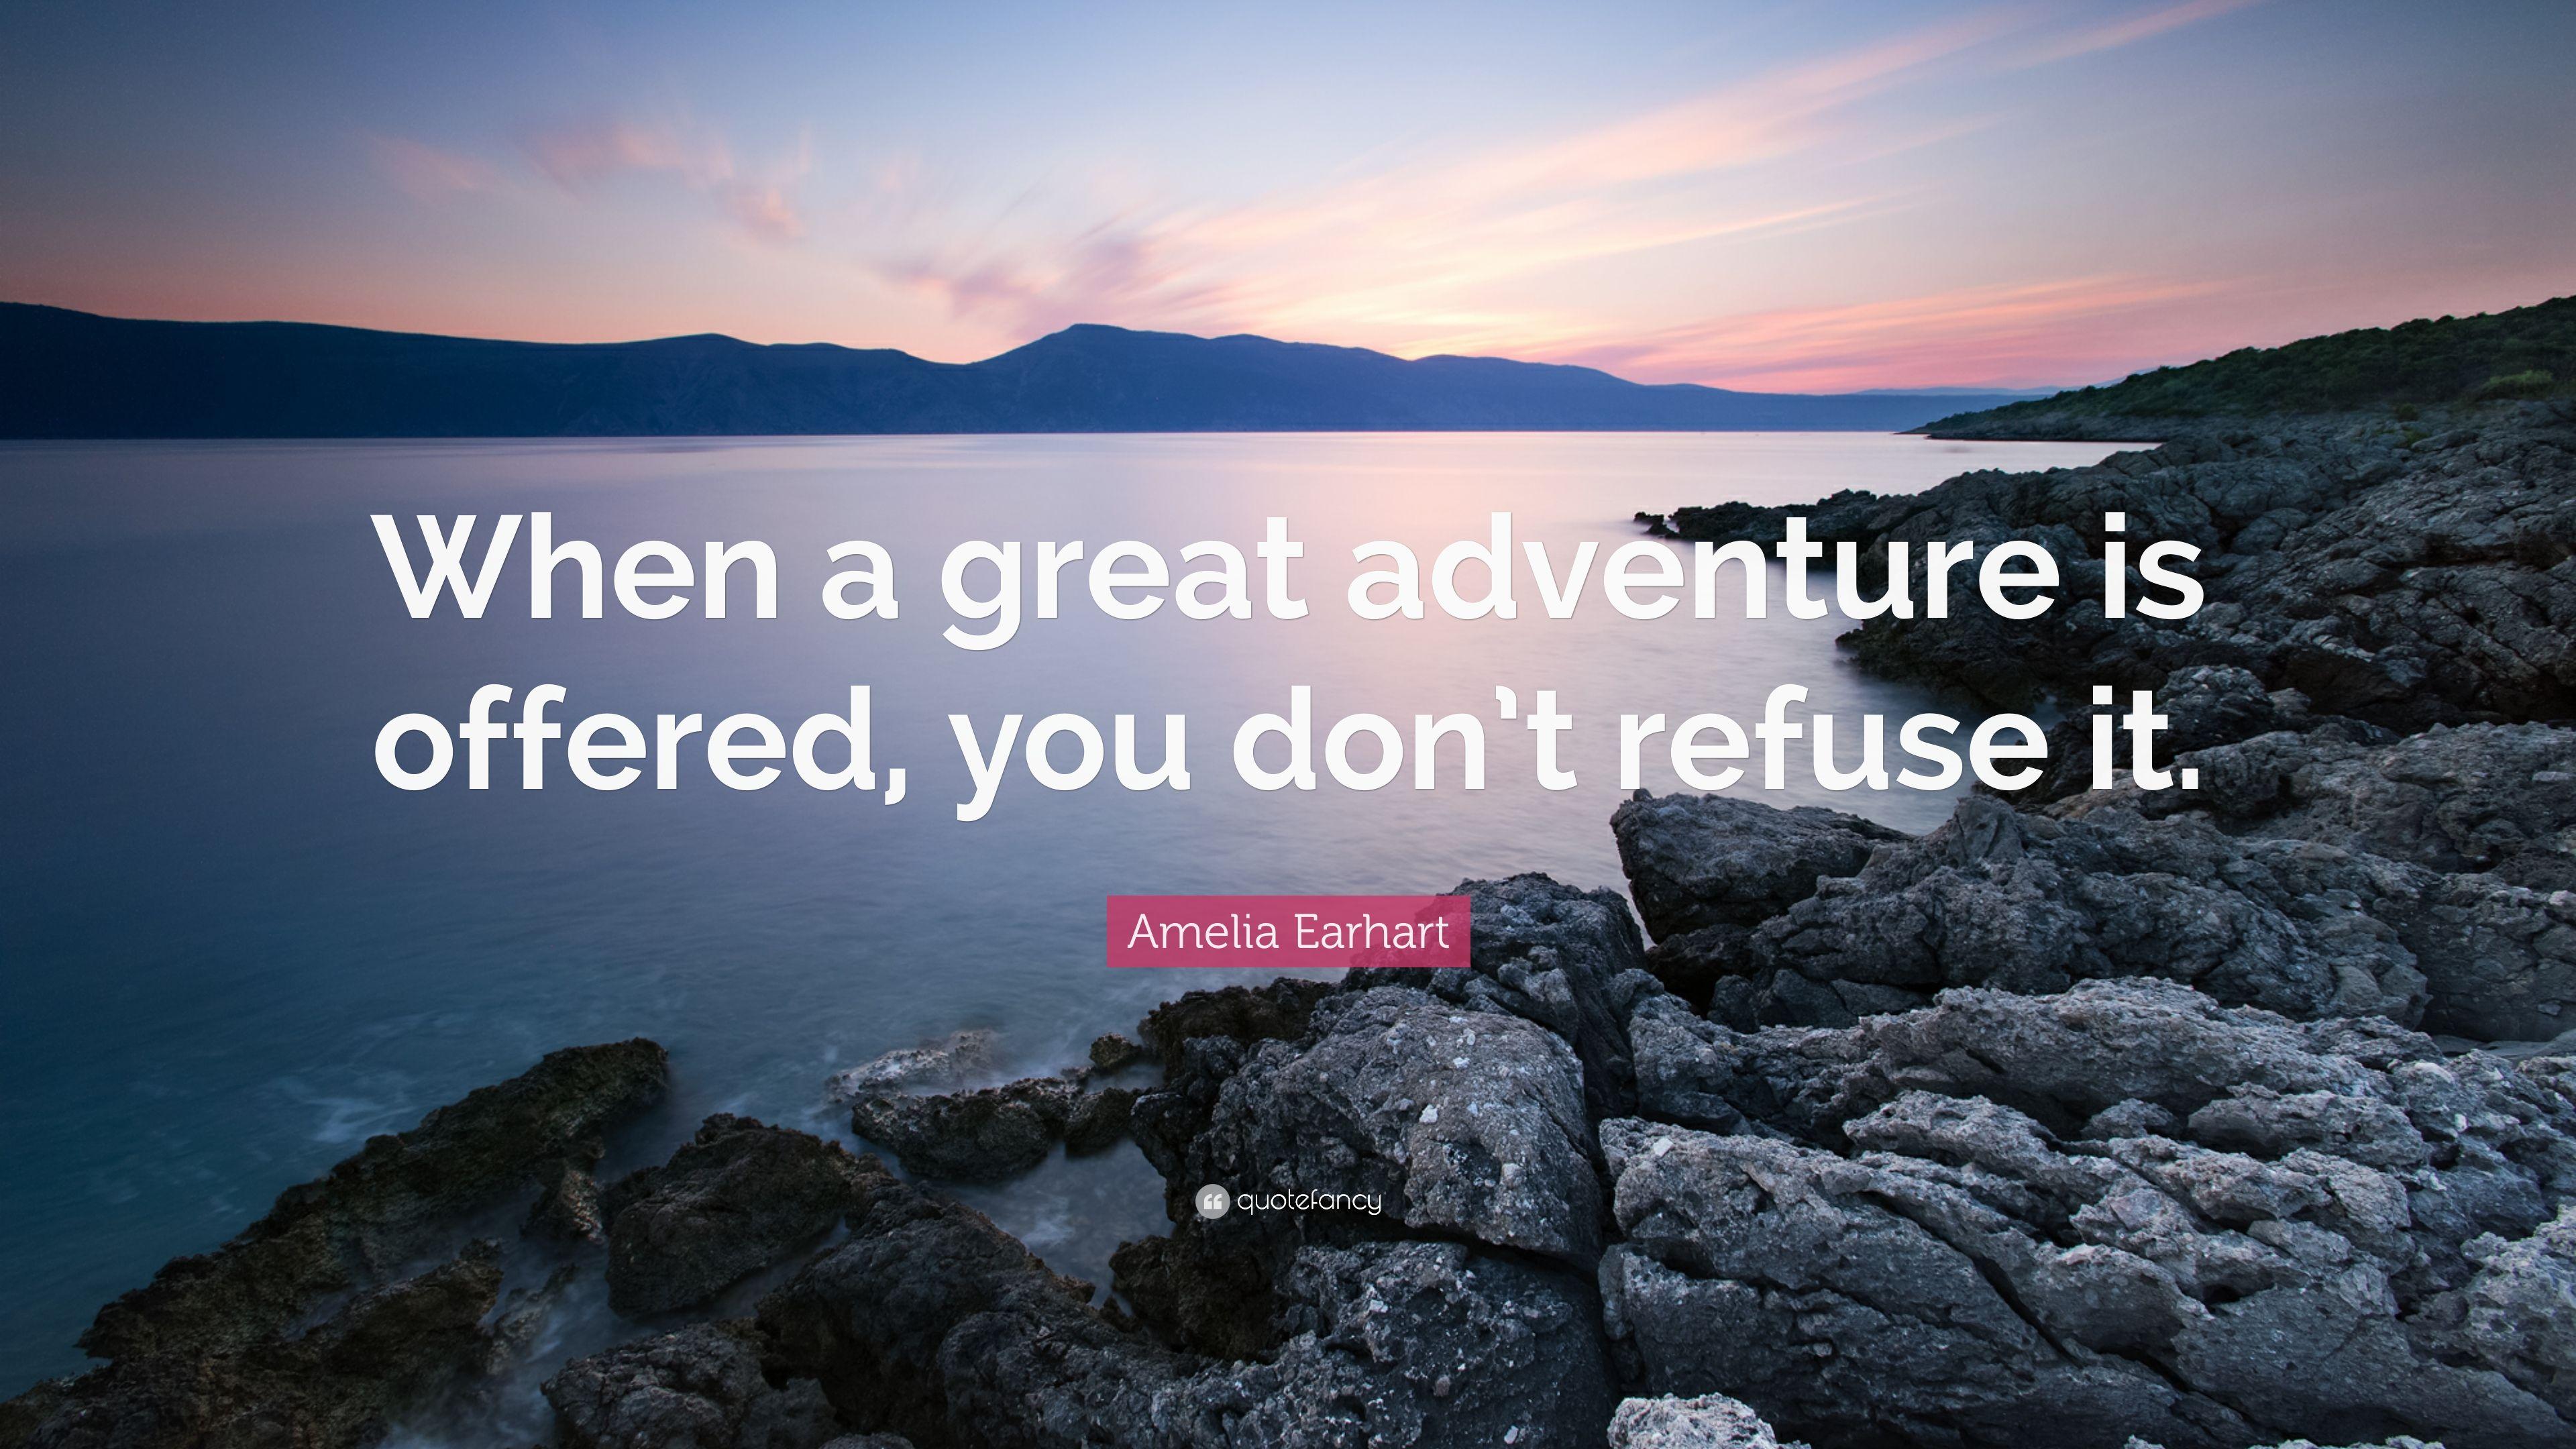 Amelia Earhart Quote: “When a great adventure is offered, you don